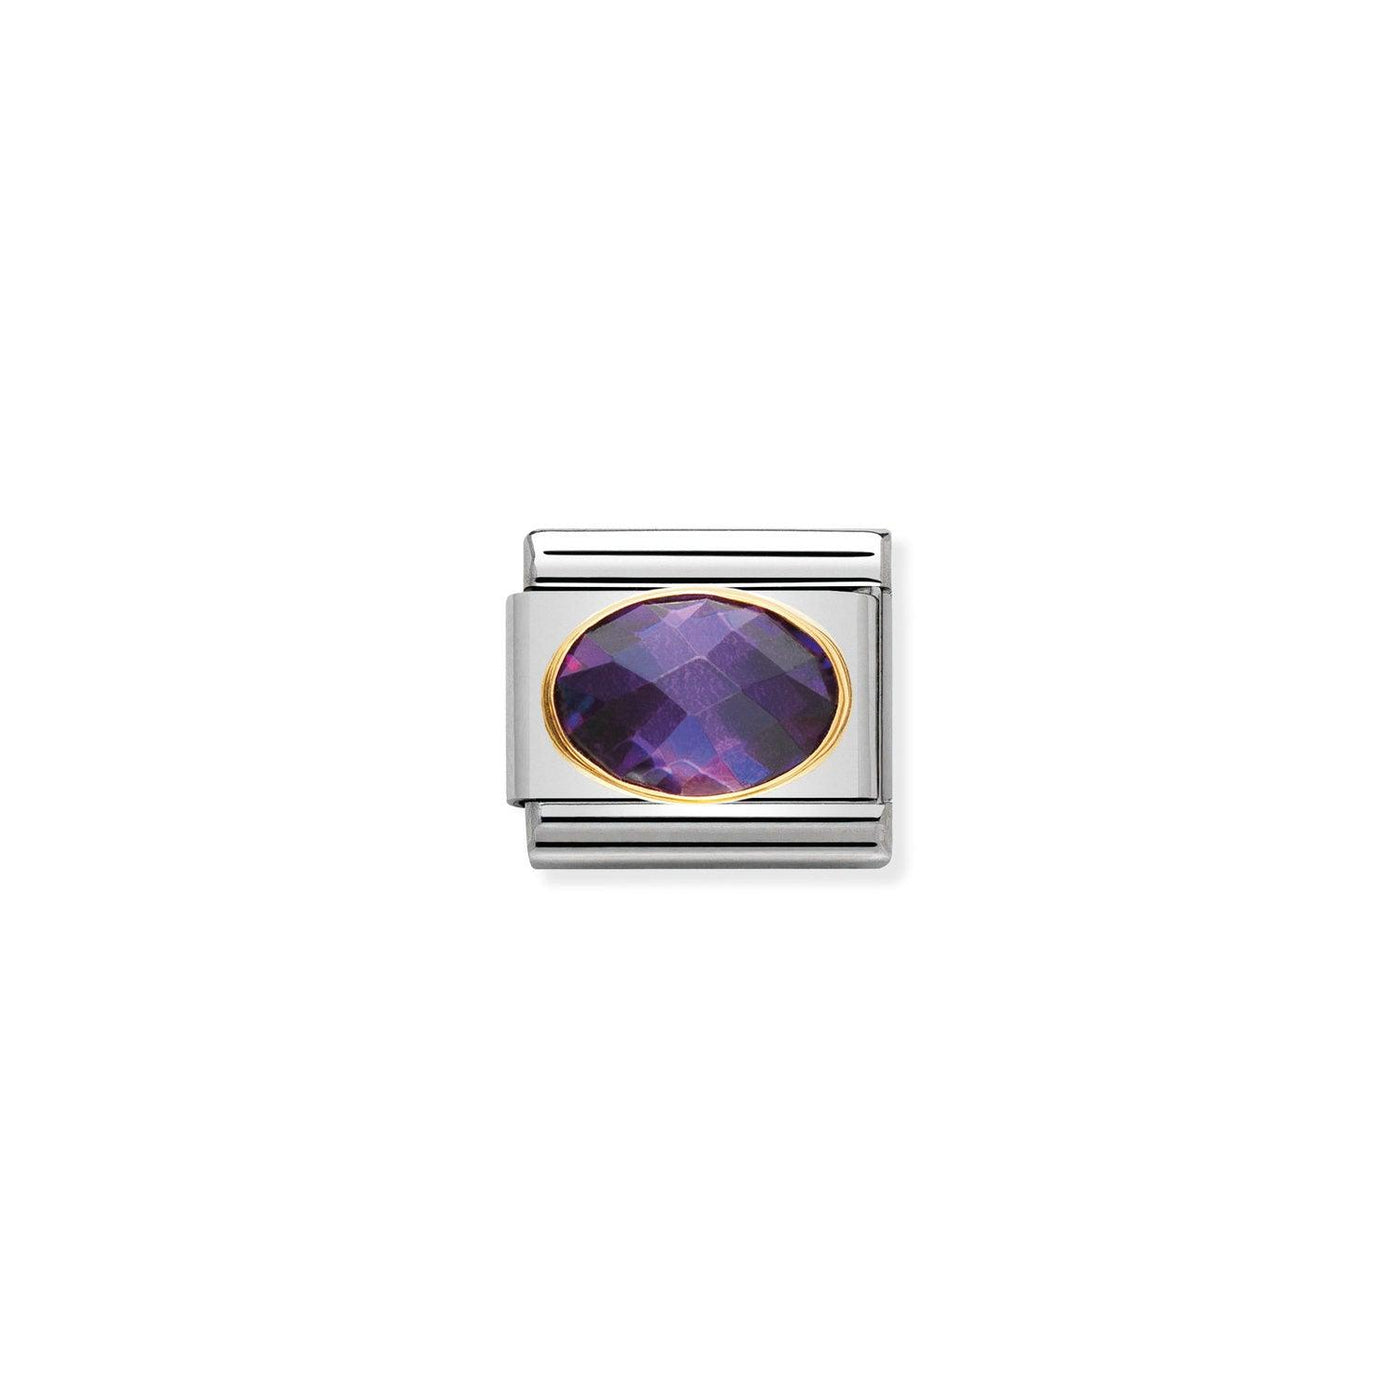 Nomination Classic 18ct Gold and Purple Faceted CZ Charm - Rococo Jewellery